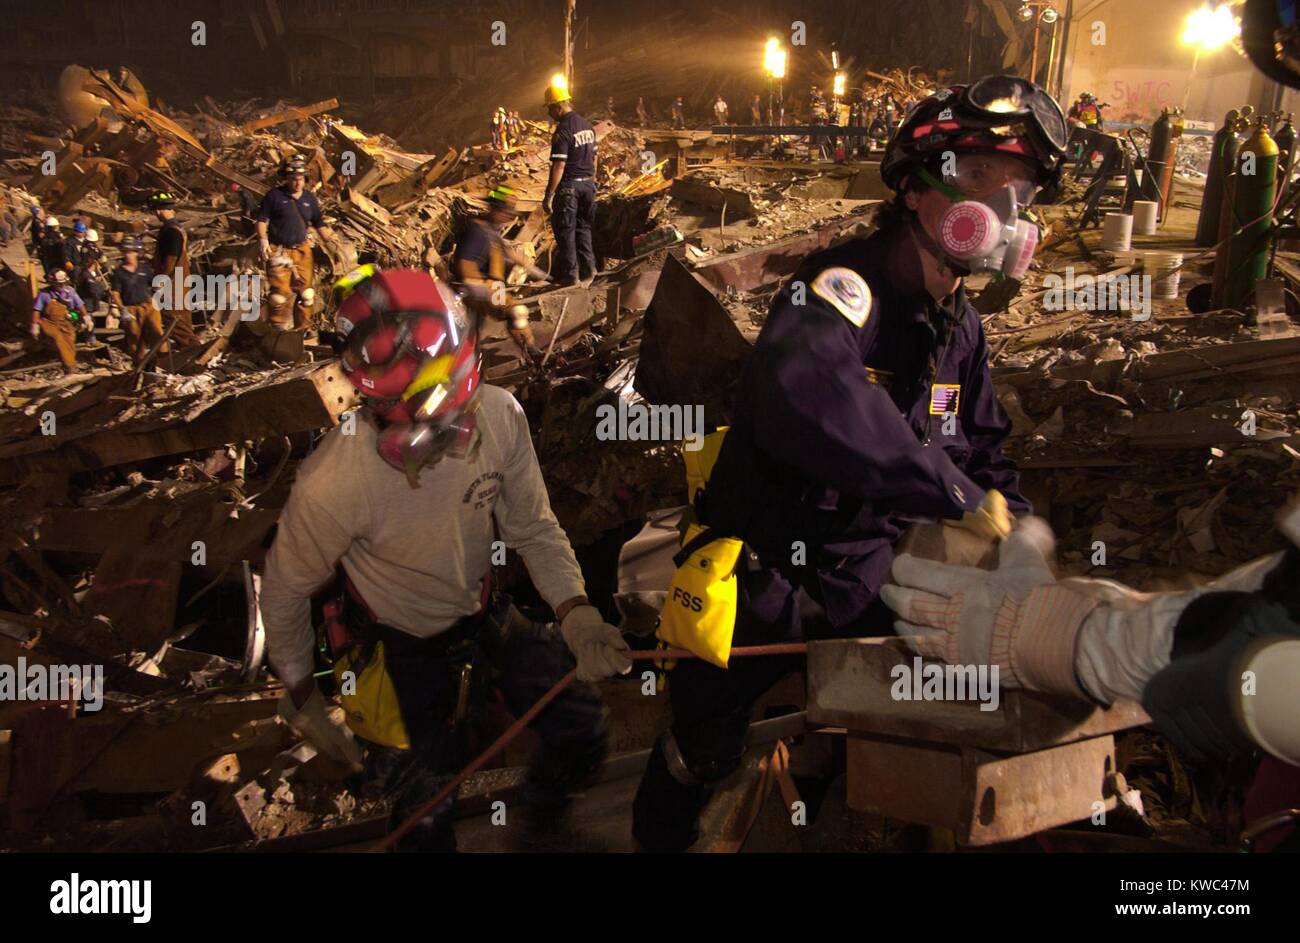 Workers lift rubble and search for survivors. Rescue operations continued into the night at the Ground Zero 7 days after the 9-11 attack on NYC, Sept. 19, 2001. World Trade Center, New York City, after September 11, 2001 terrorist attacks. (BSLOC 2015 2 101) Stock Photo